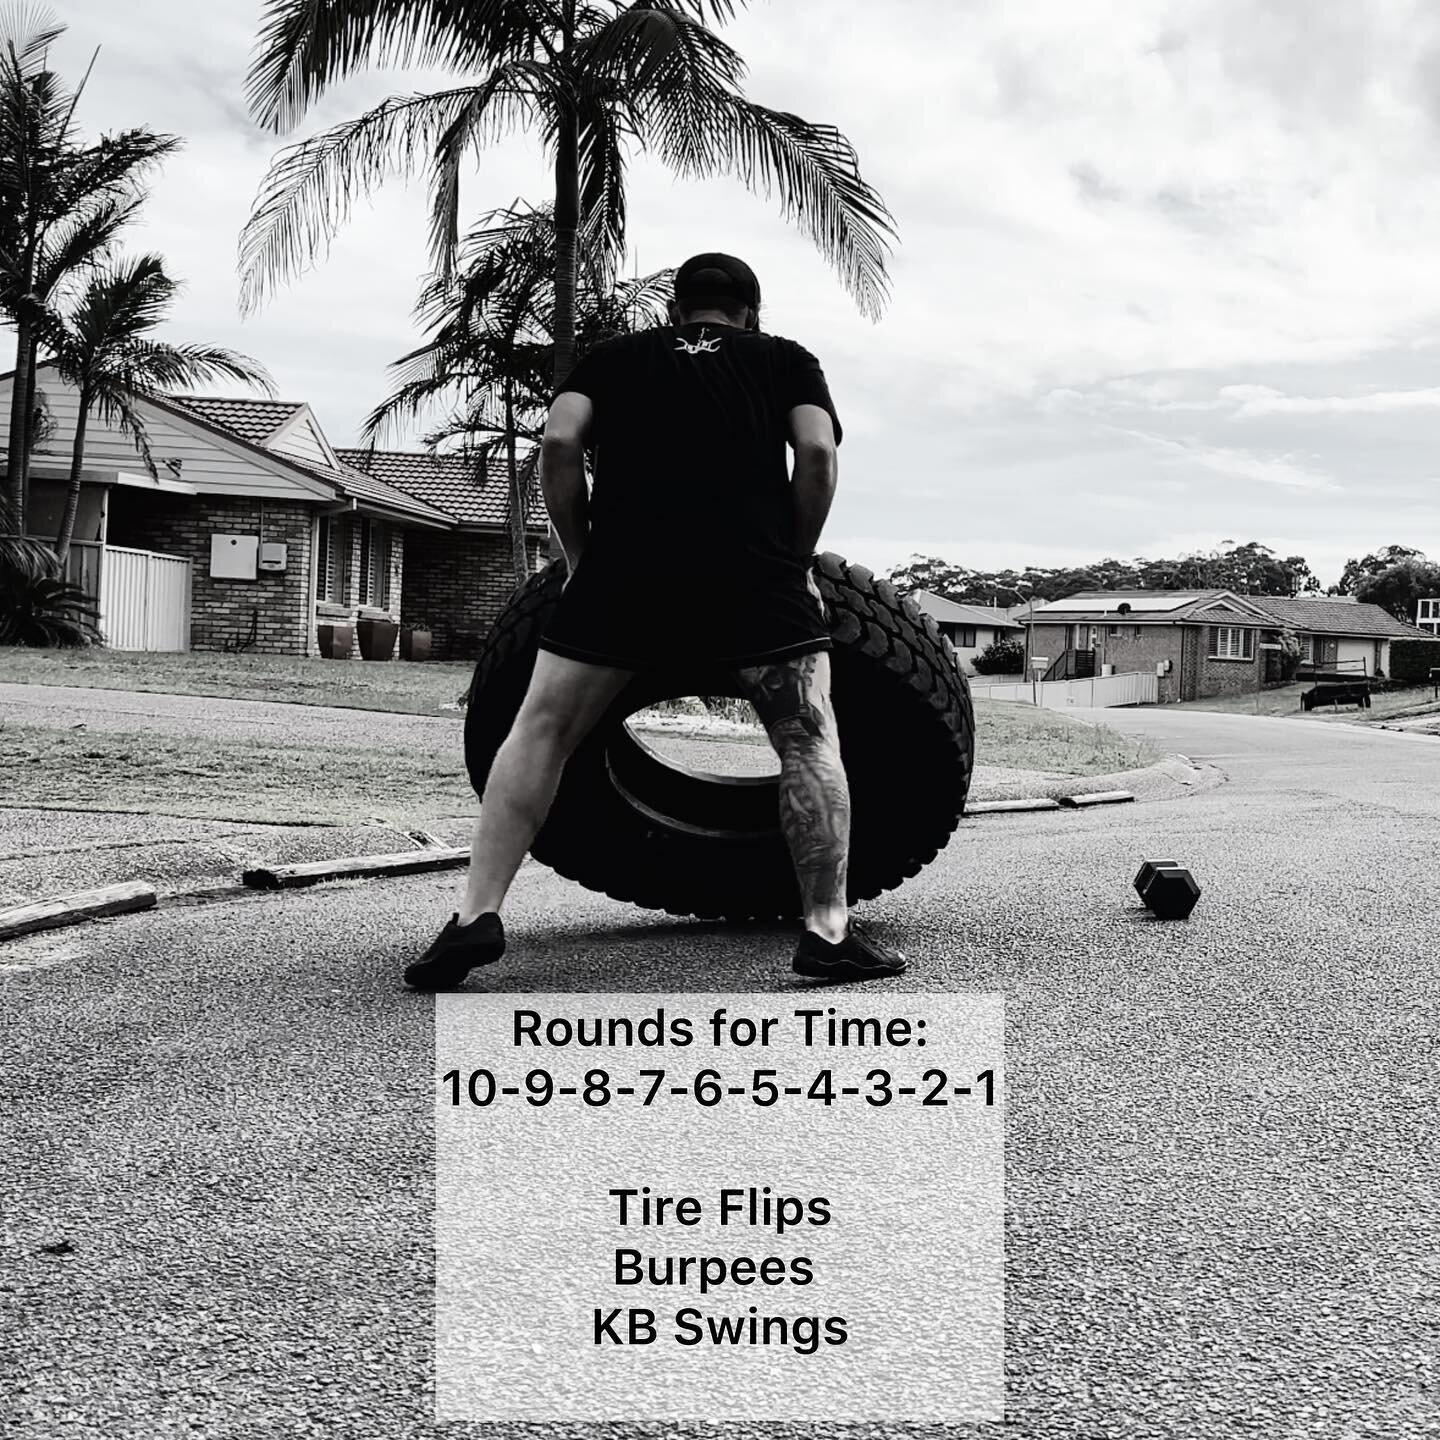 For Time. Go

Workout: (reps of each)
10 reps
9 reps
8 reps
7 reps
6 reps
5 reps
4 reps
3 reps
2 reps
1 rep

The exercises:
Tire Flips
Burpees 
KB Swings (I used a DB)

Intensity:
For Time.

Scale:
Pick a good KB/DB weight. Pace yourself.

Tip:
Keep 